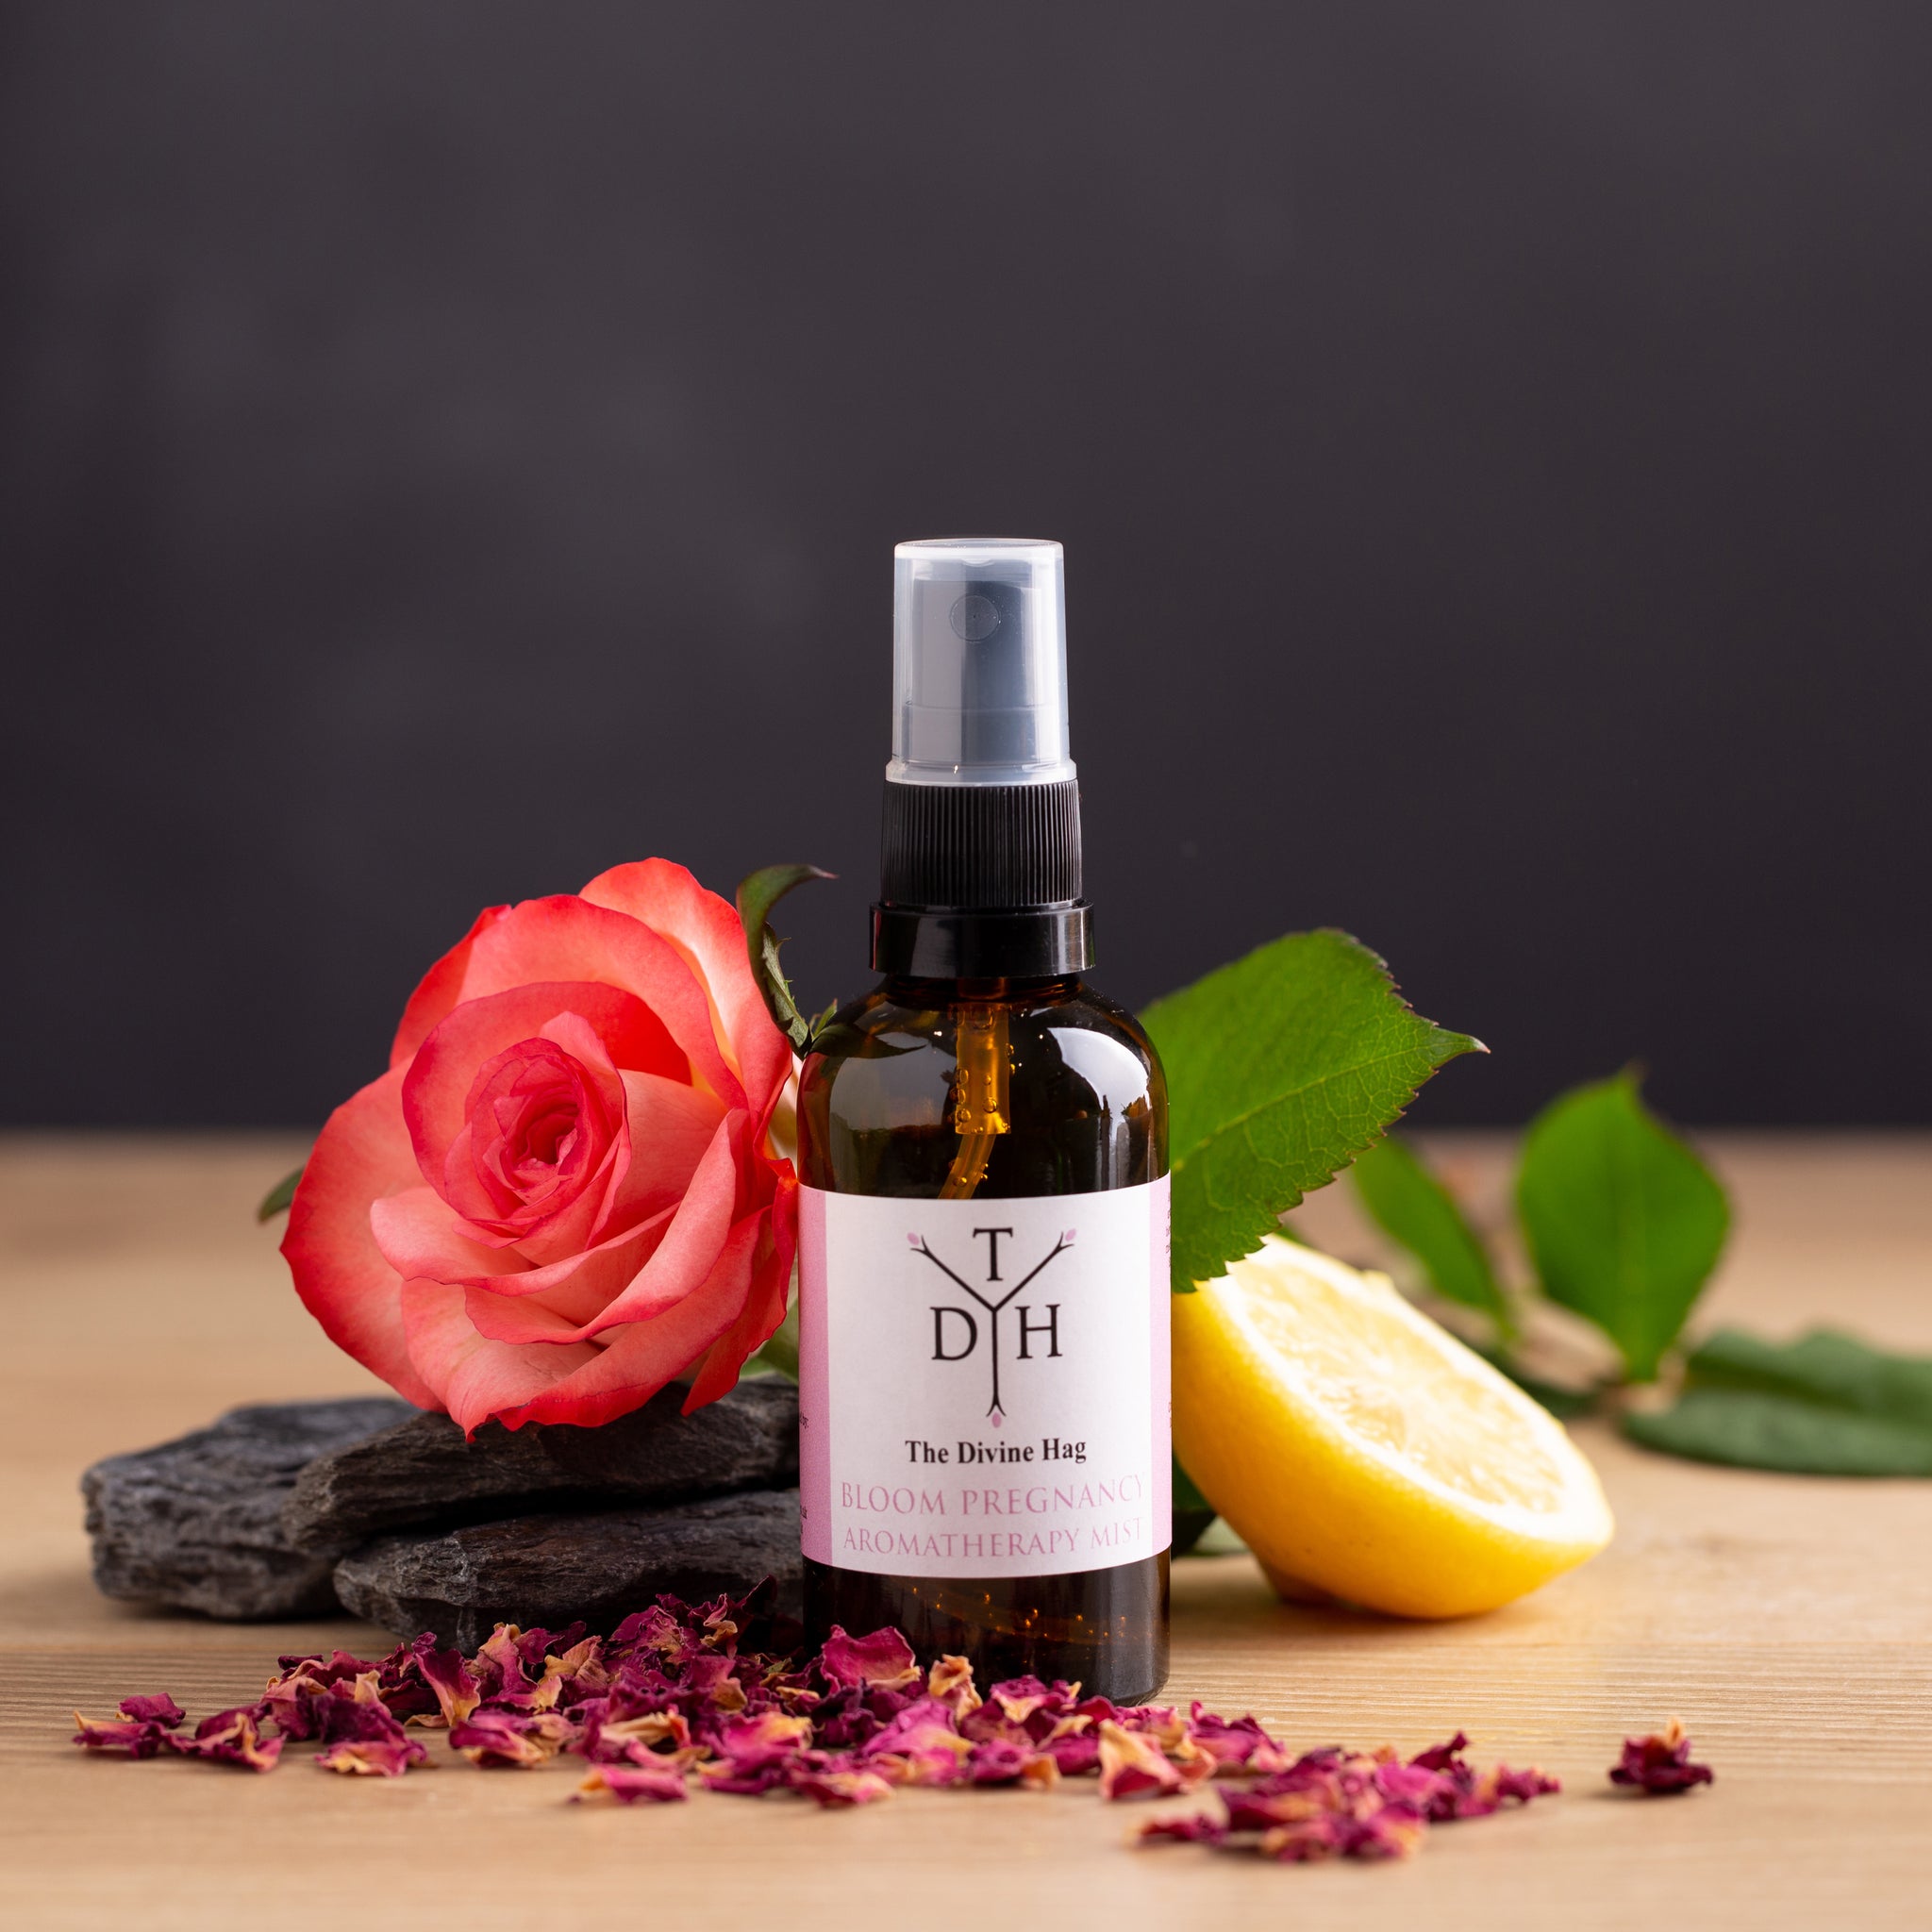 Bloom Pregnancy Relaxation Aromatherapy Mist